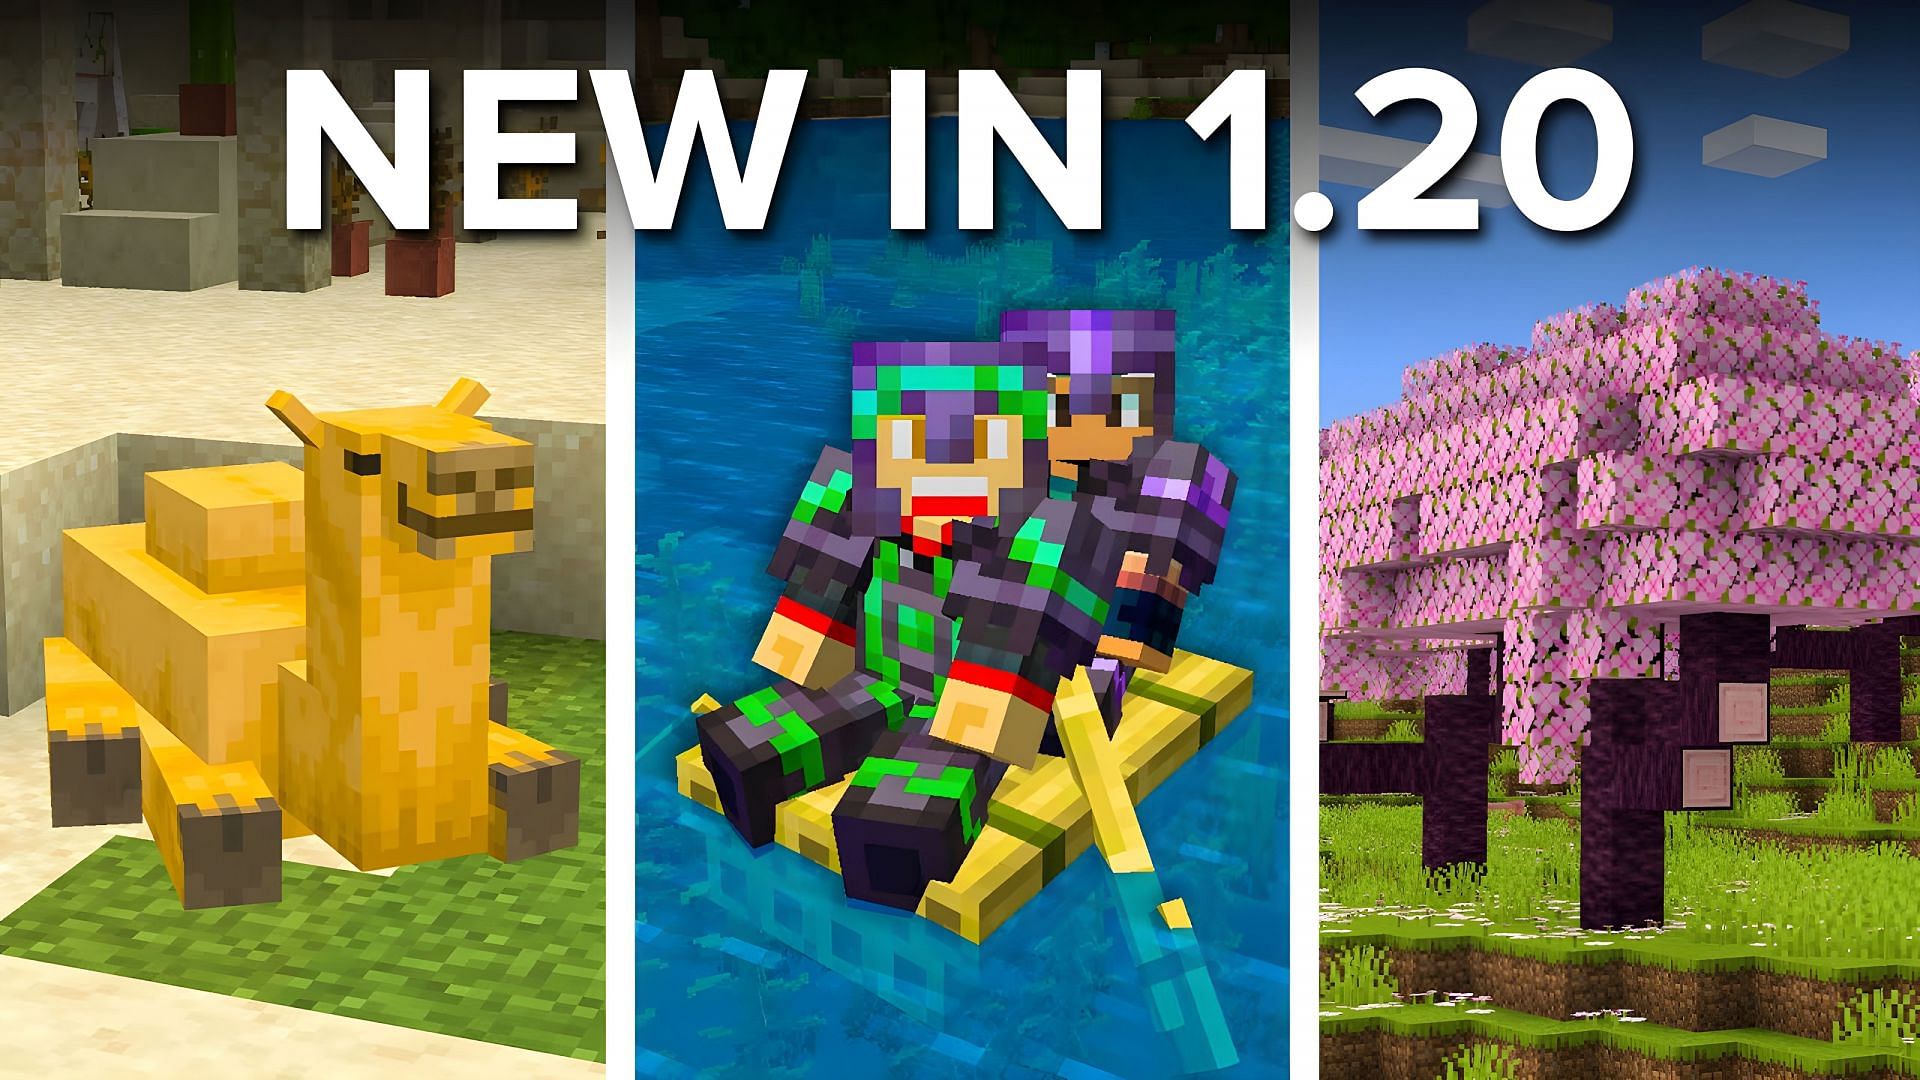 The new Minecraft 1.20 update allows for tons of crazy cool builds (Image via Youtube/Shulkercraft)